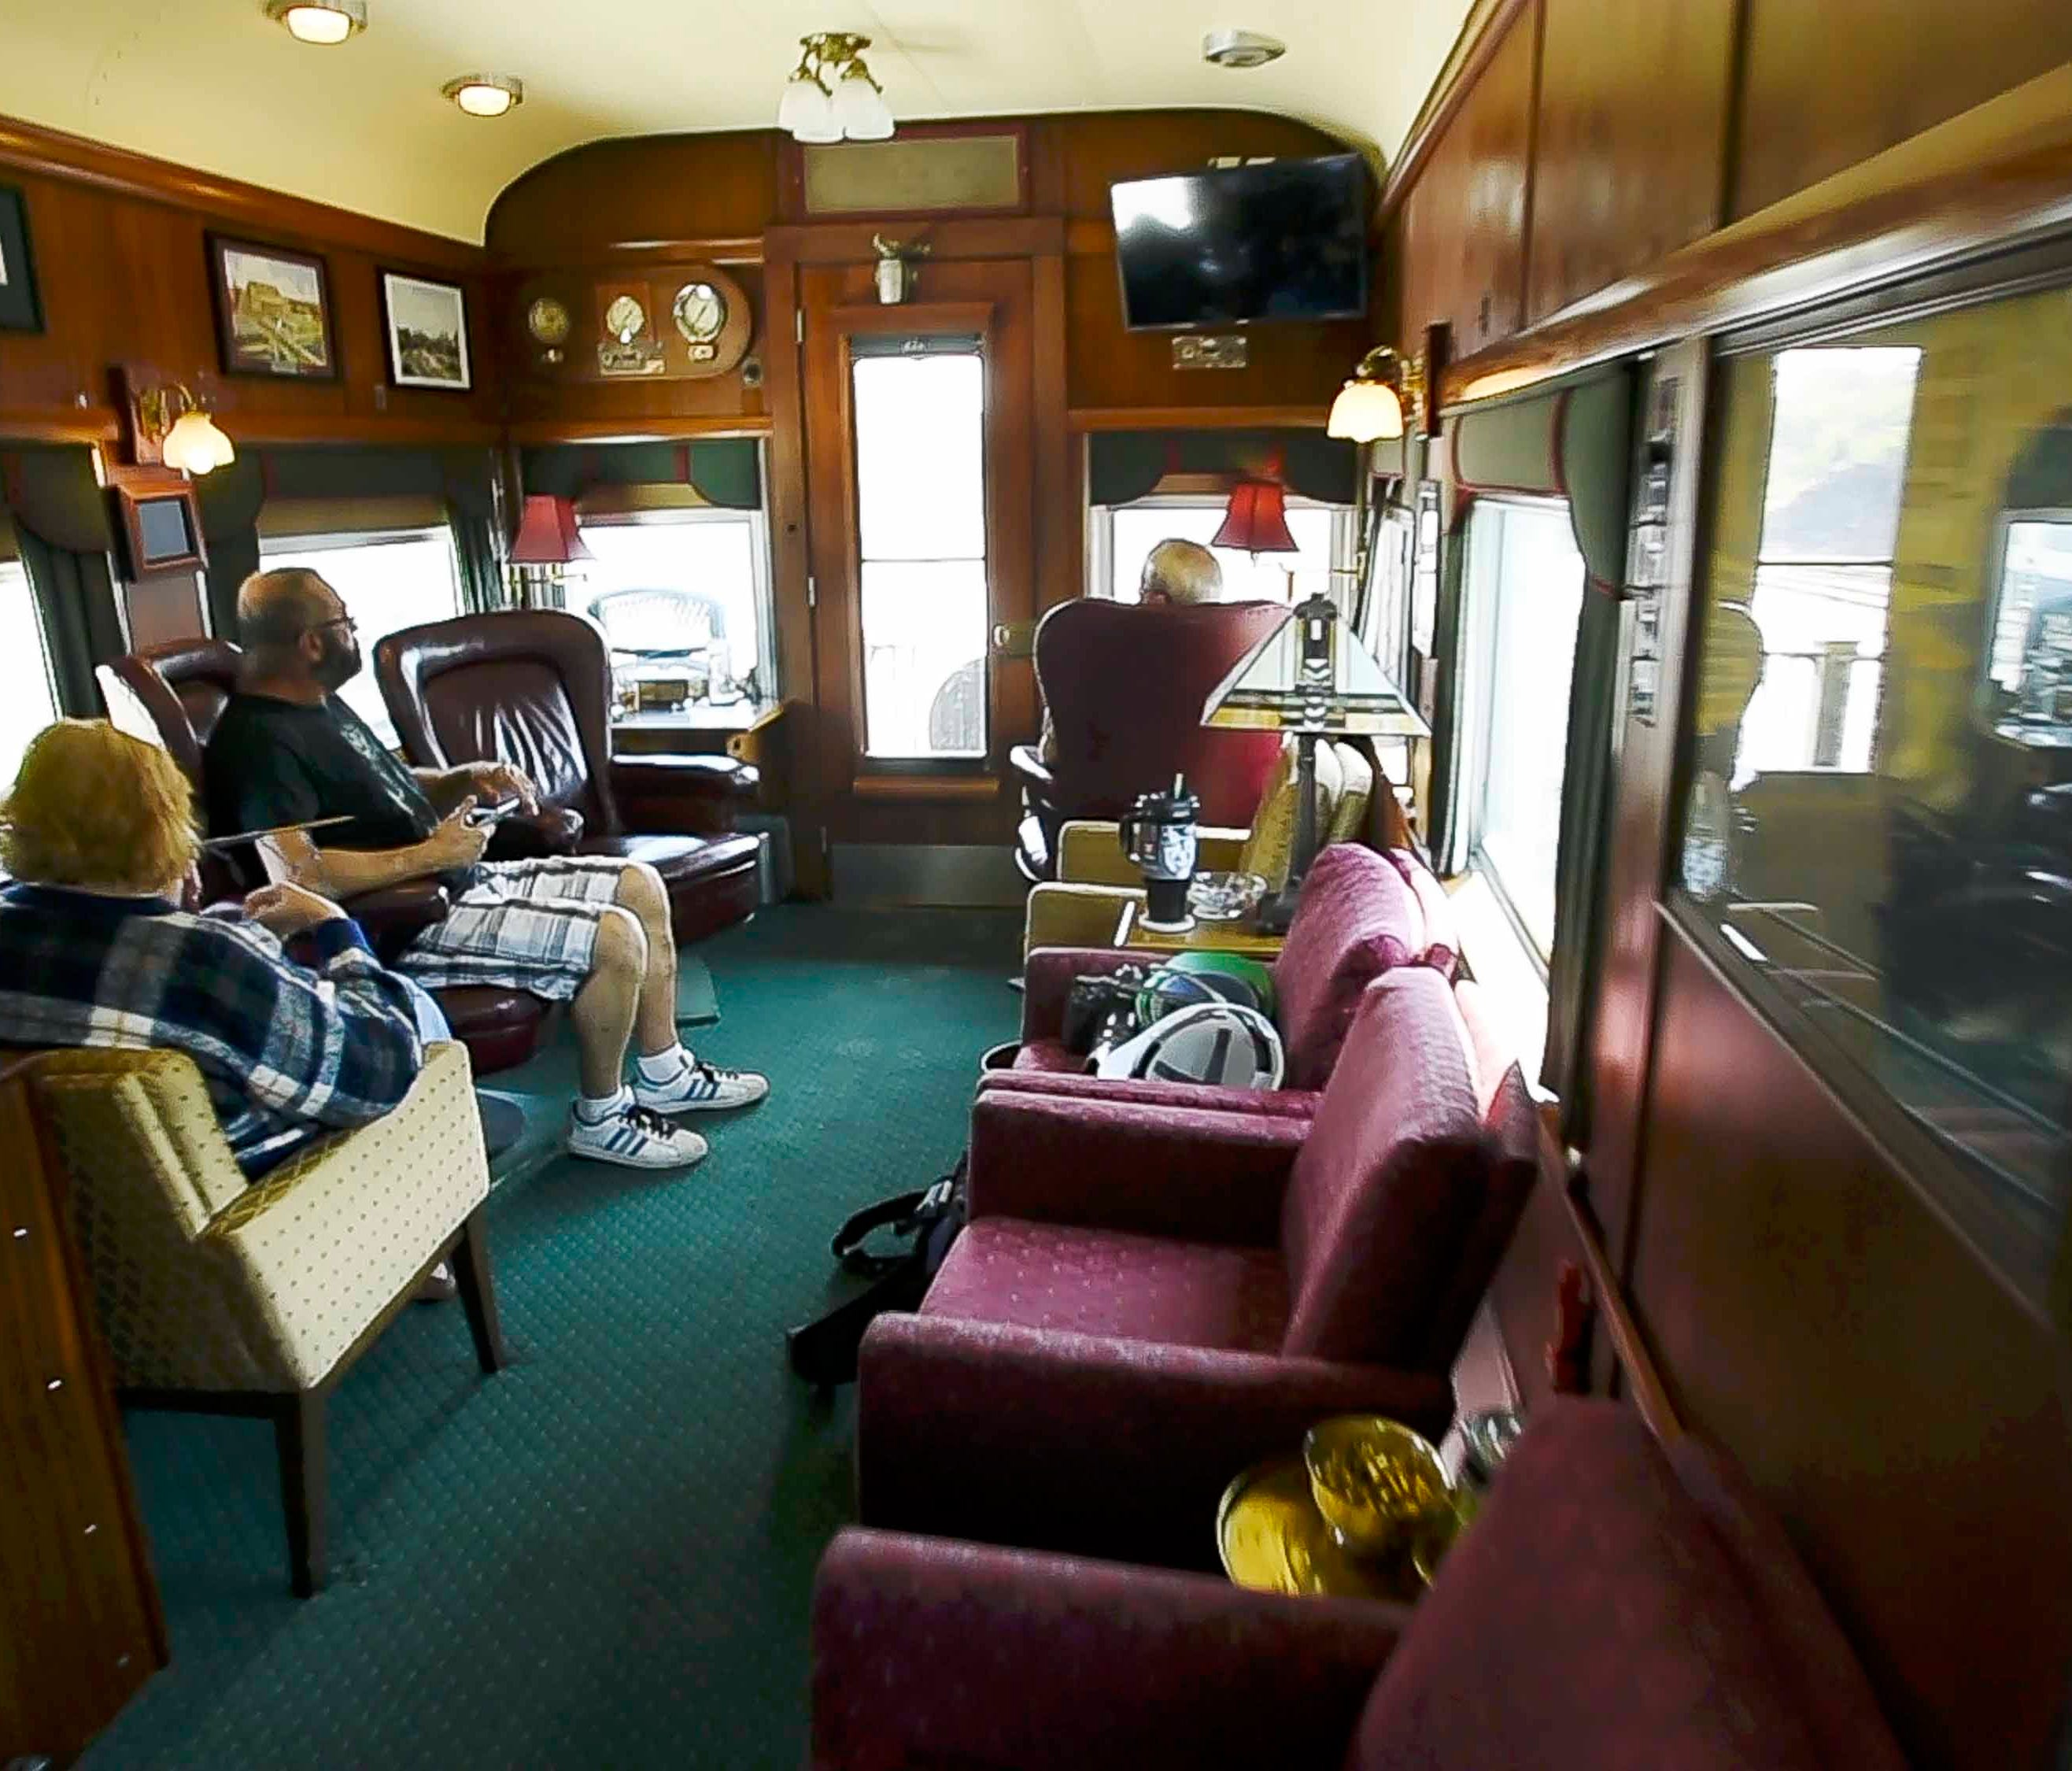 Passengers can relax in the cars' staterooms as they ride the rails.